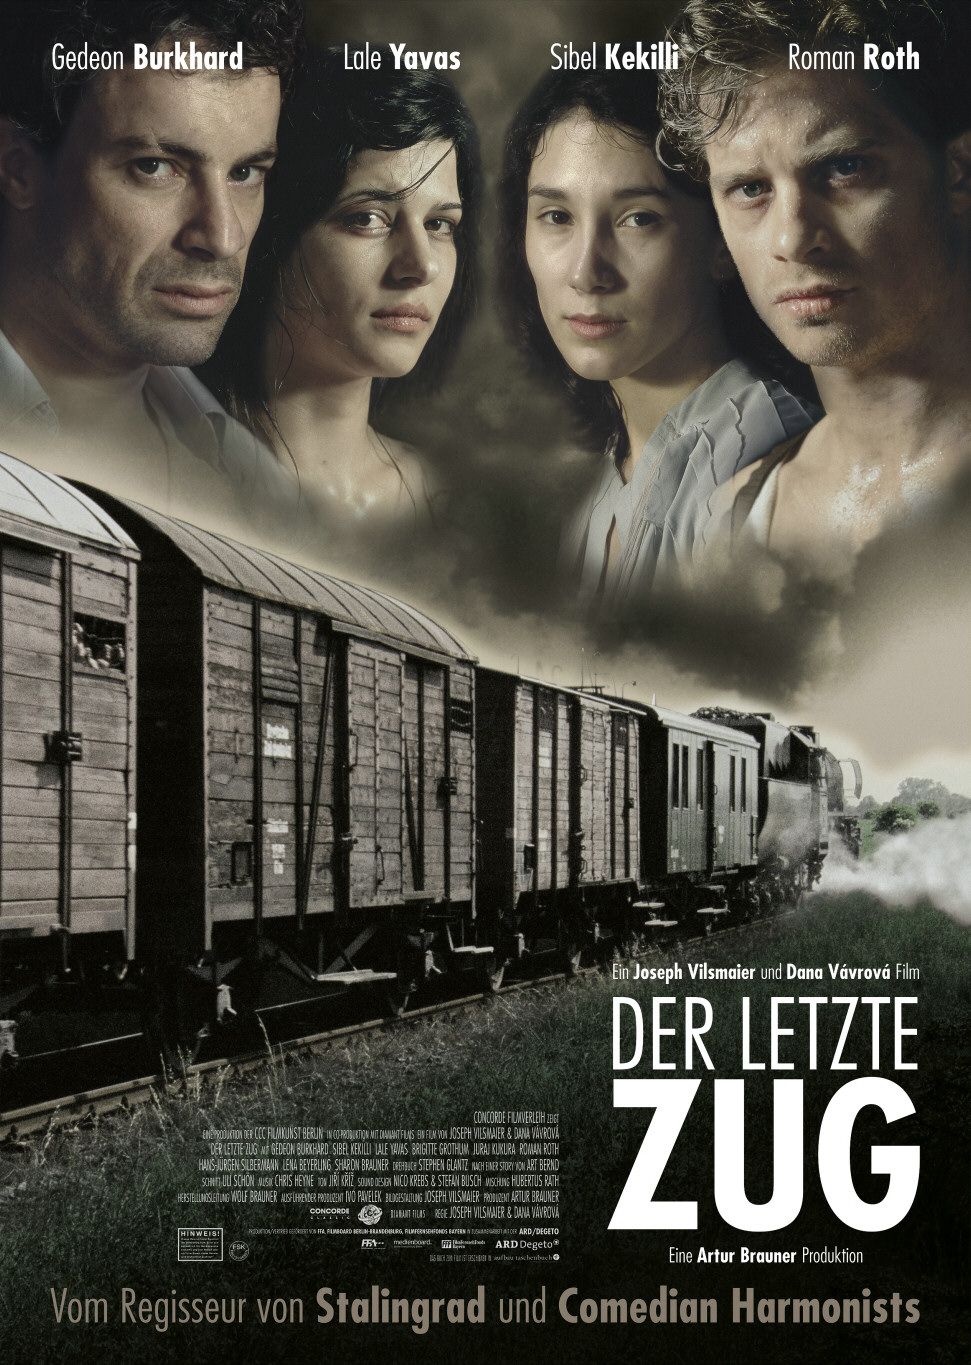 Extra Large Movie Poster Image for Letzte Zug, Der 